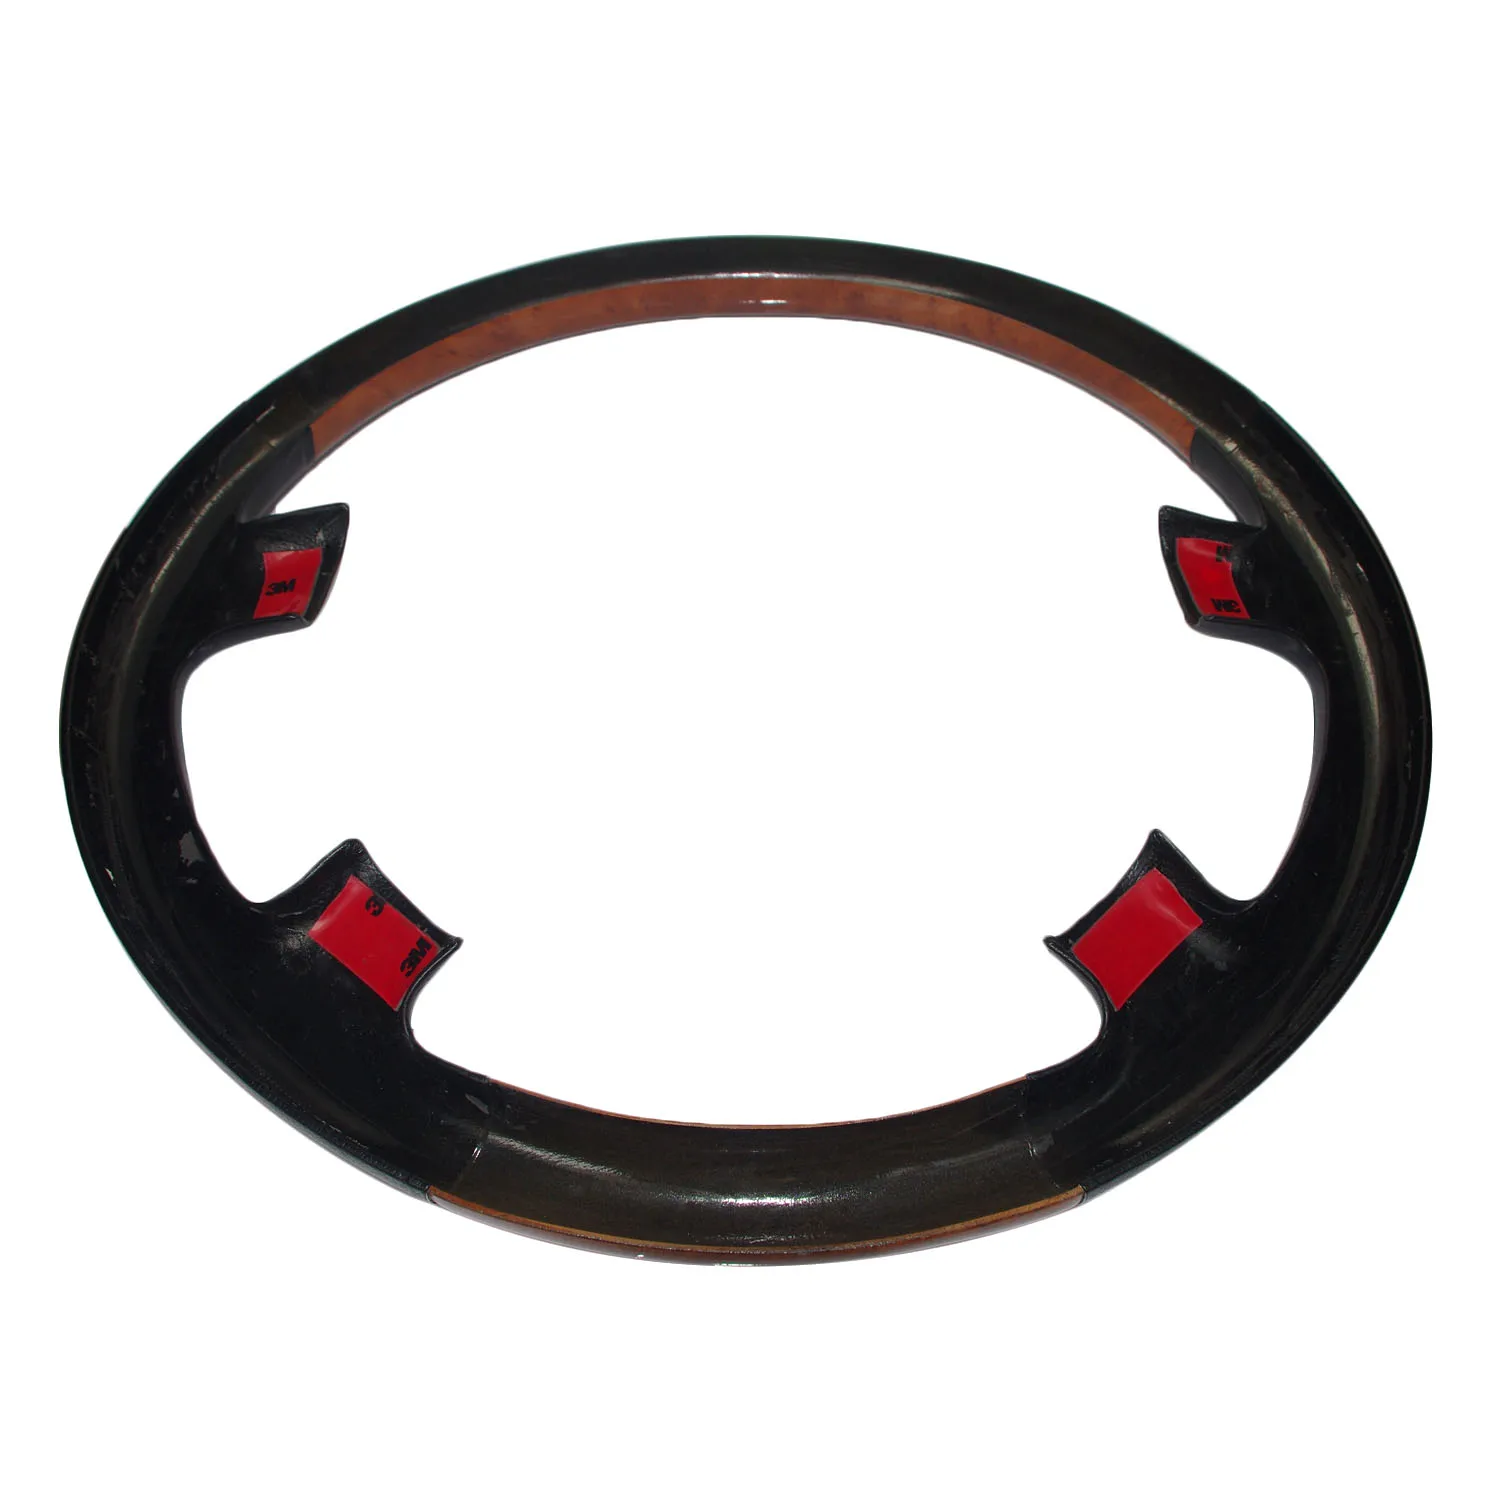 Details about   FITS TOYOTA LAND CRUISER HDJ 100 BEIGE LEATHER STEERING WHEEL COVER BLACK STITCH 